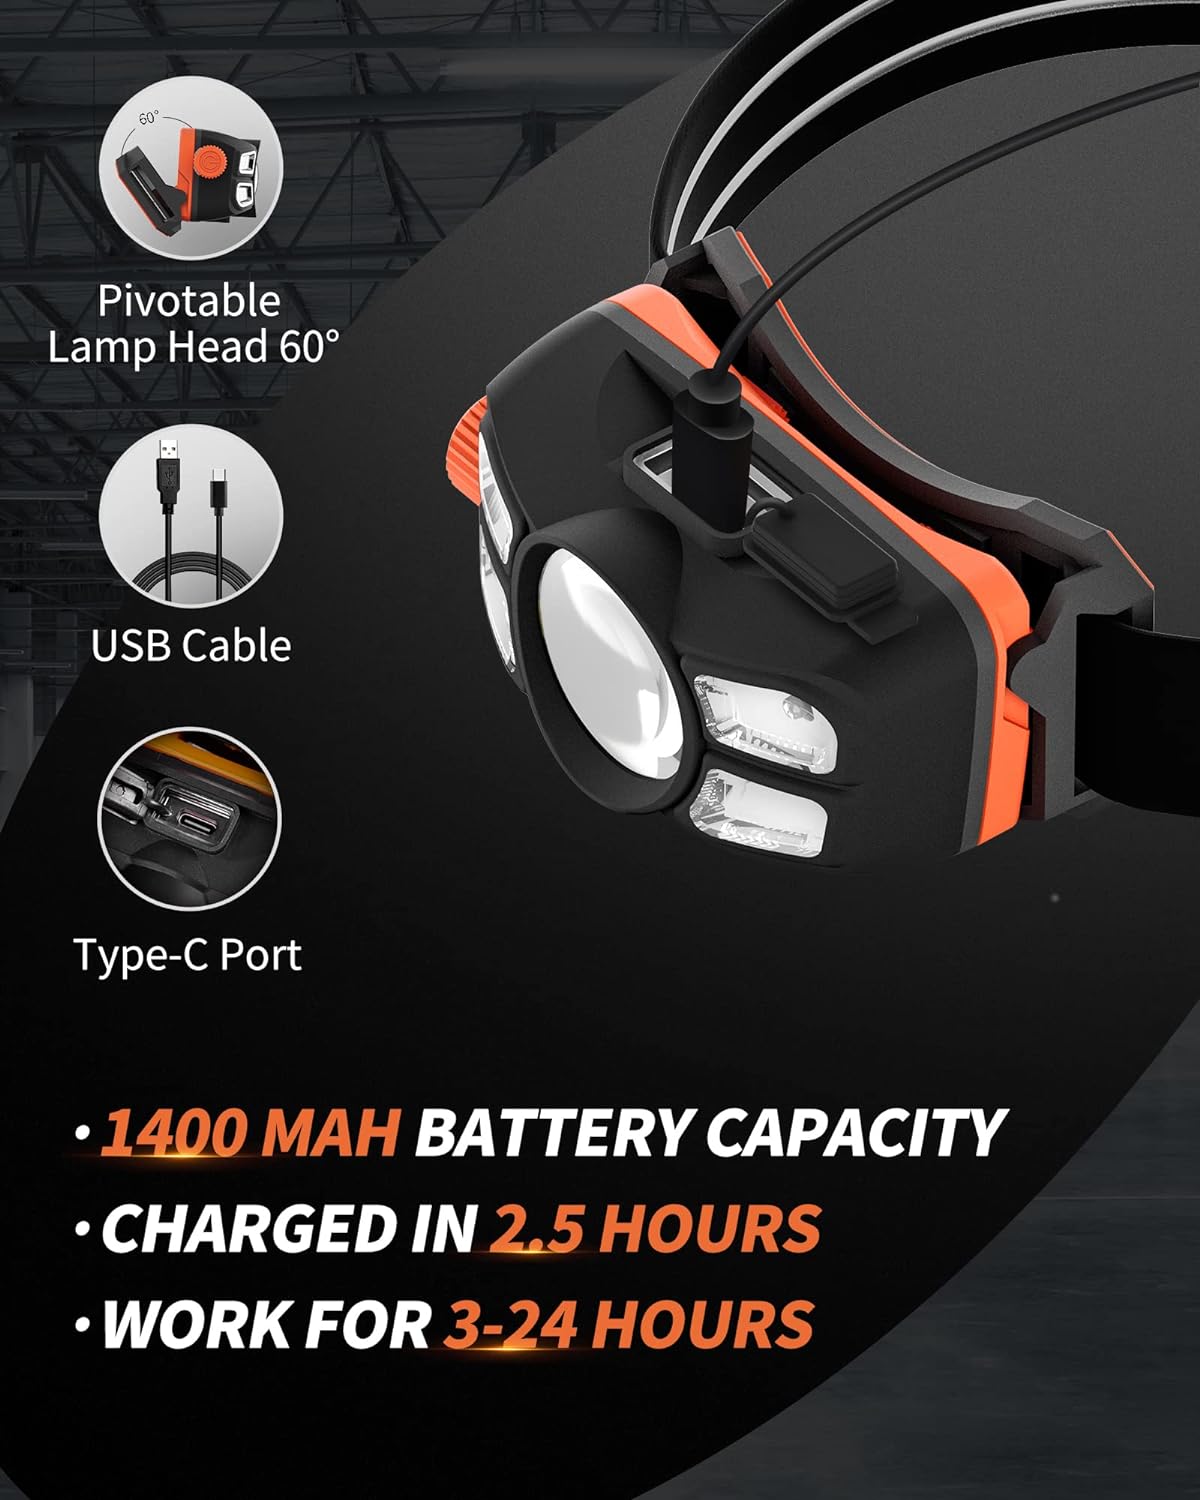 Anylight Rechargeable Headlamp,500 Lumens LED Head Lamp with Stepless Dimming and Motion Sensor, IP65 Waterproof Headlight for Repairing, Running, Camping, Hiking(1 Pack)